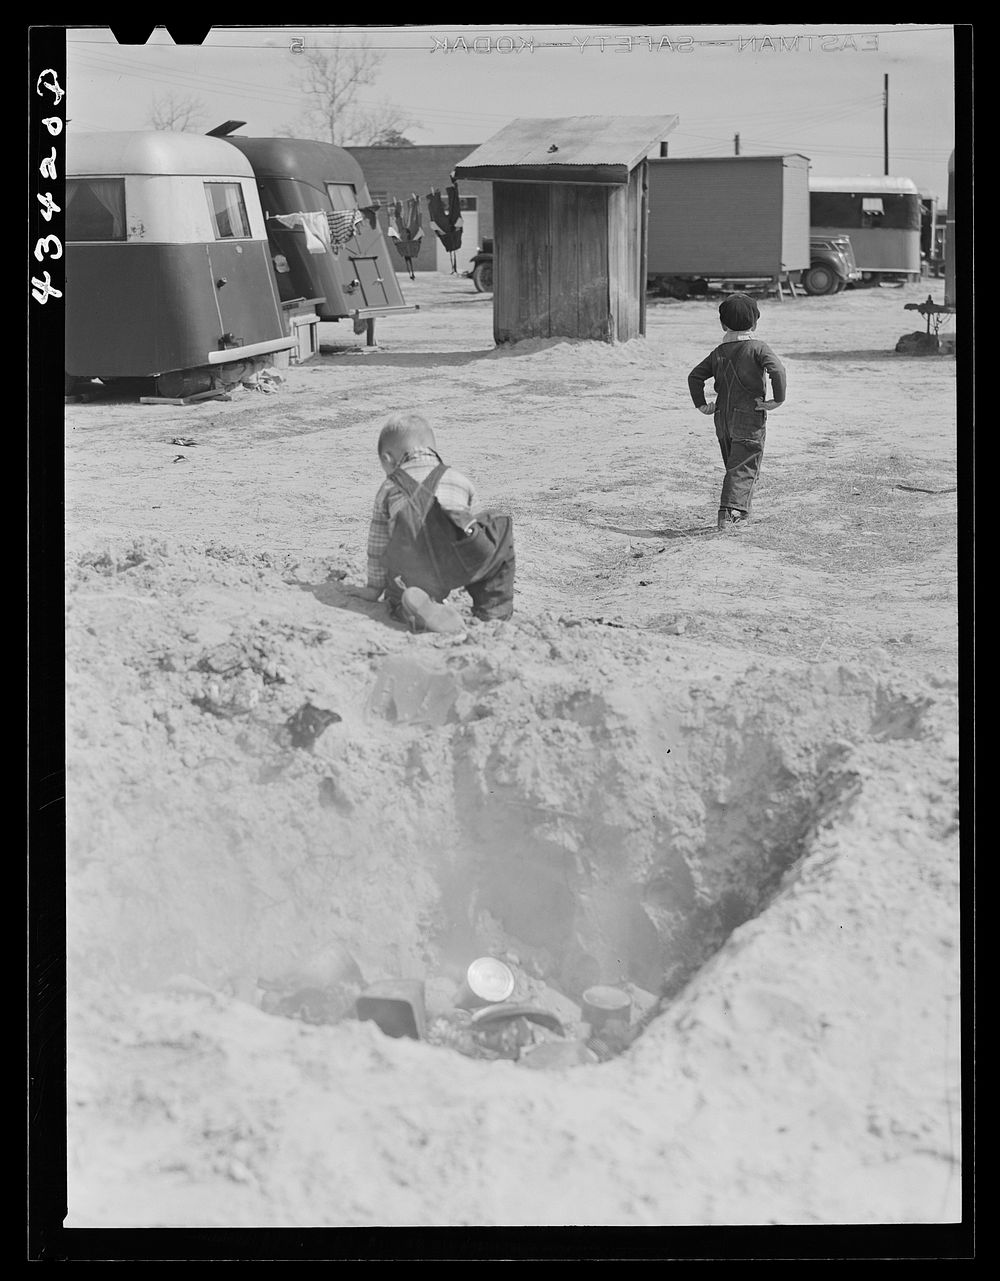 Children in trailer camp of construction workers from Fort Bragg. Near Fayetteville, North Carolina. Sourced from the…